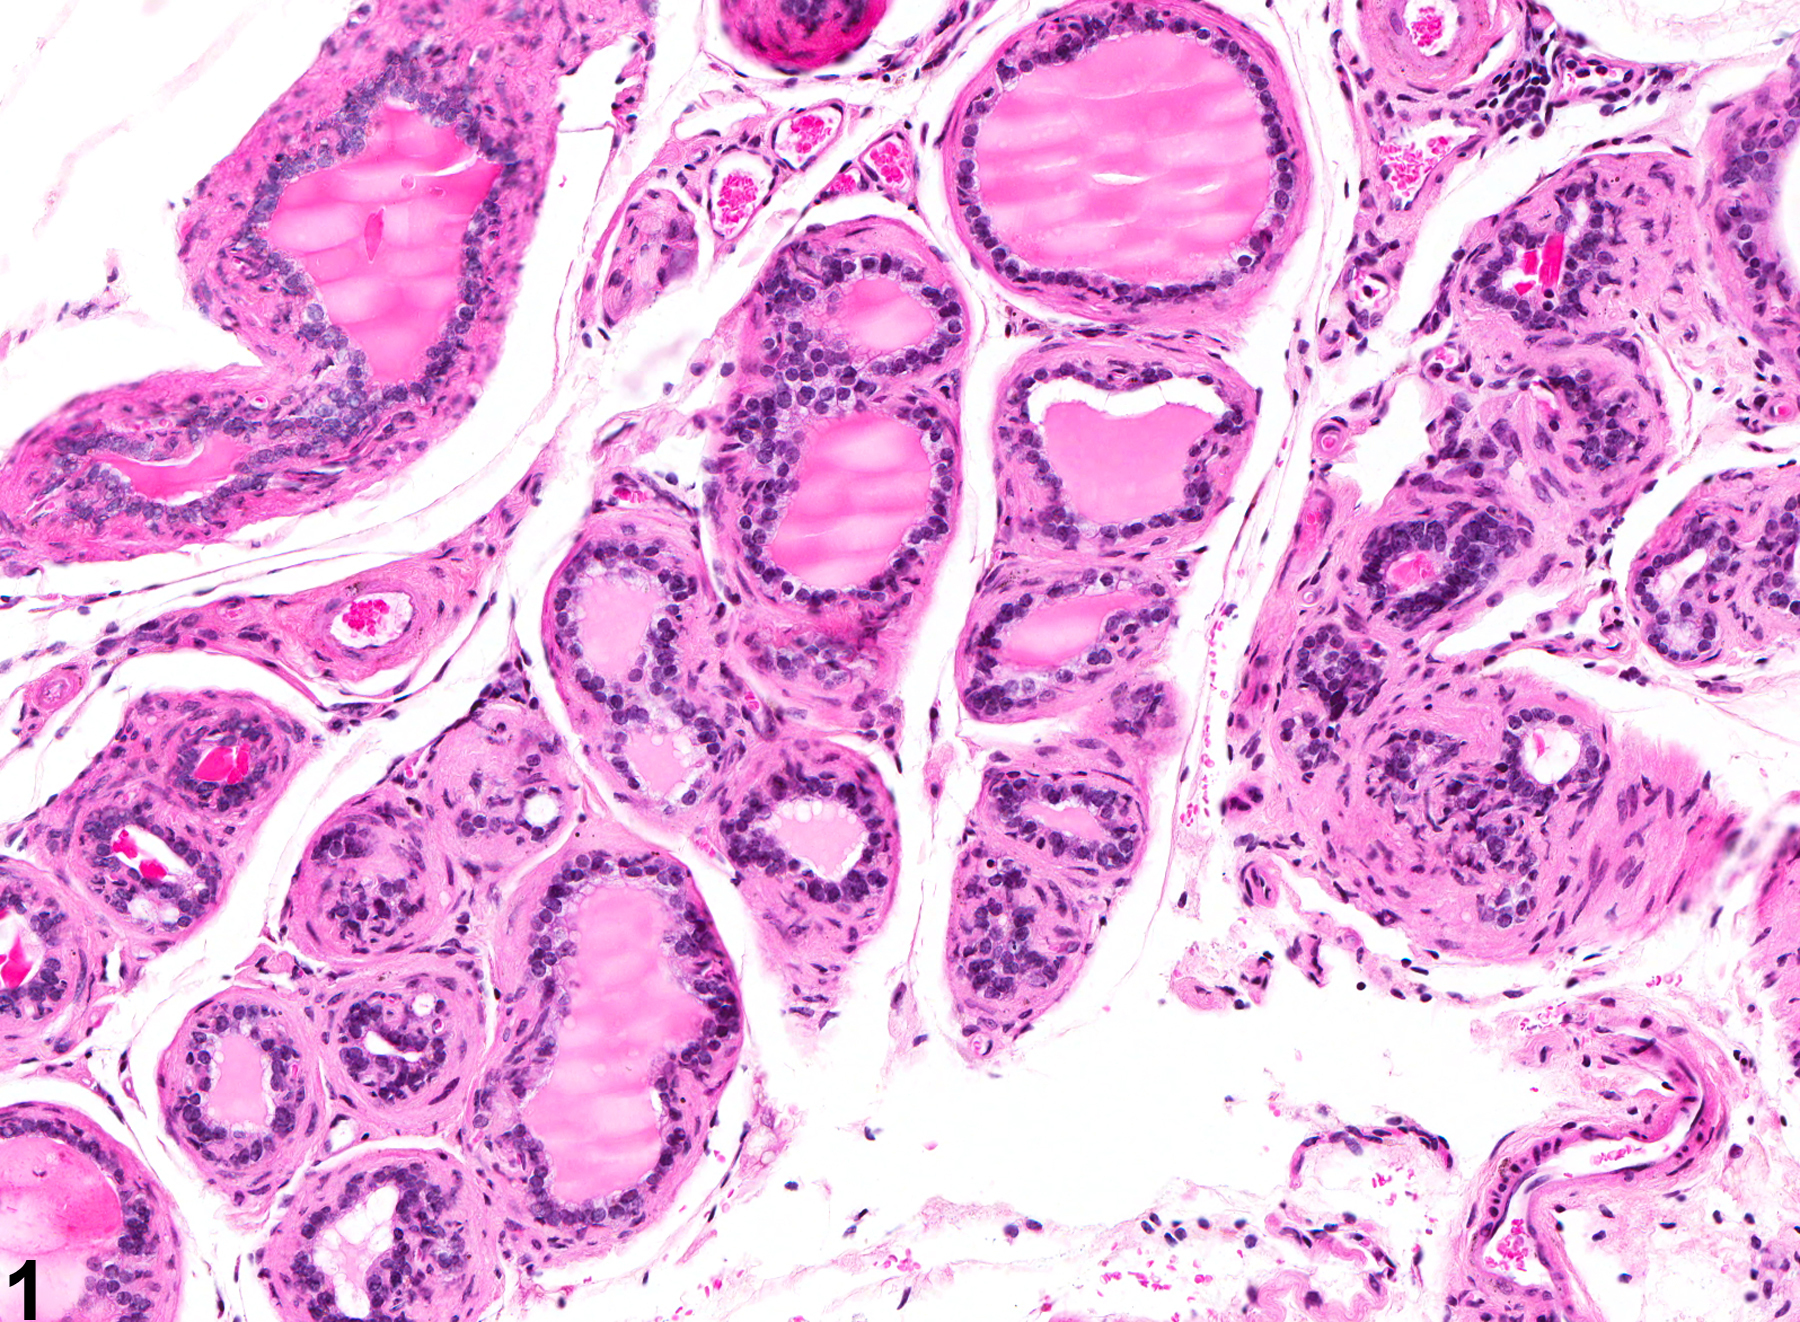 Image of atrophy in the coagulating gland from a male B6C3F1 mouse in a chronic study